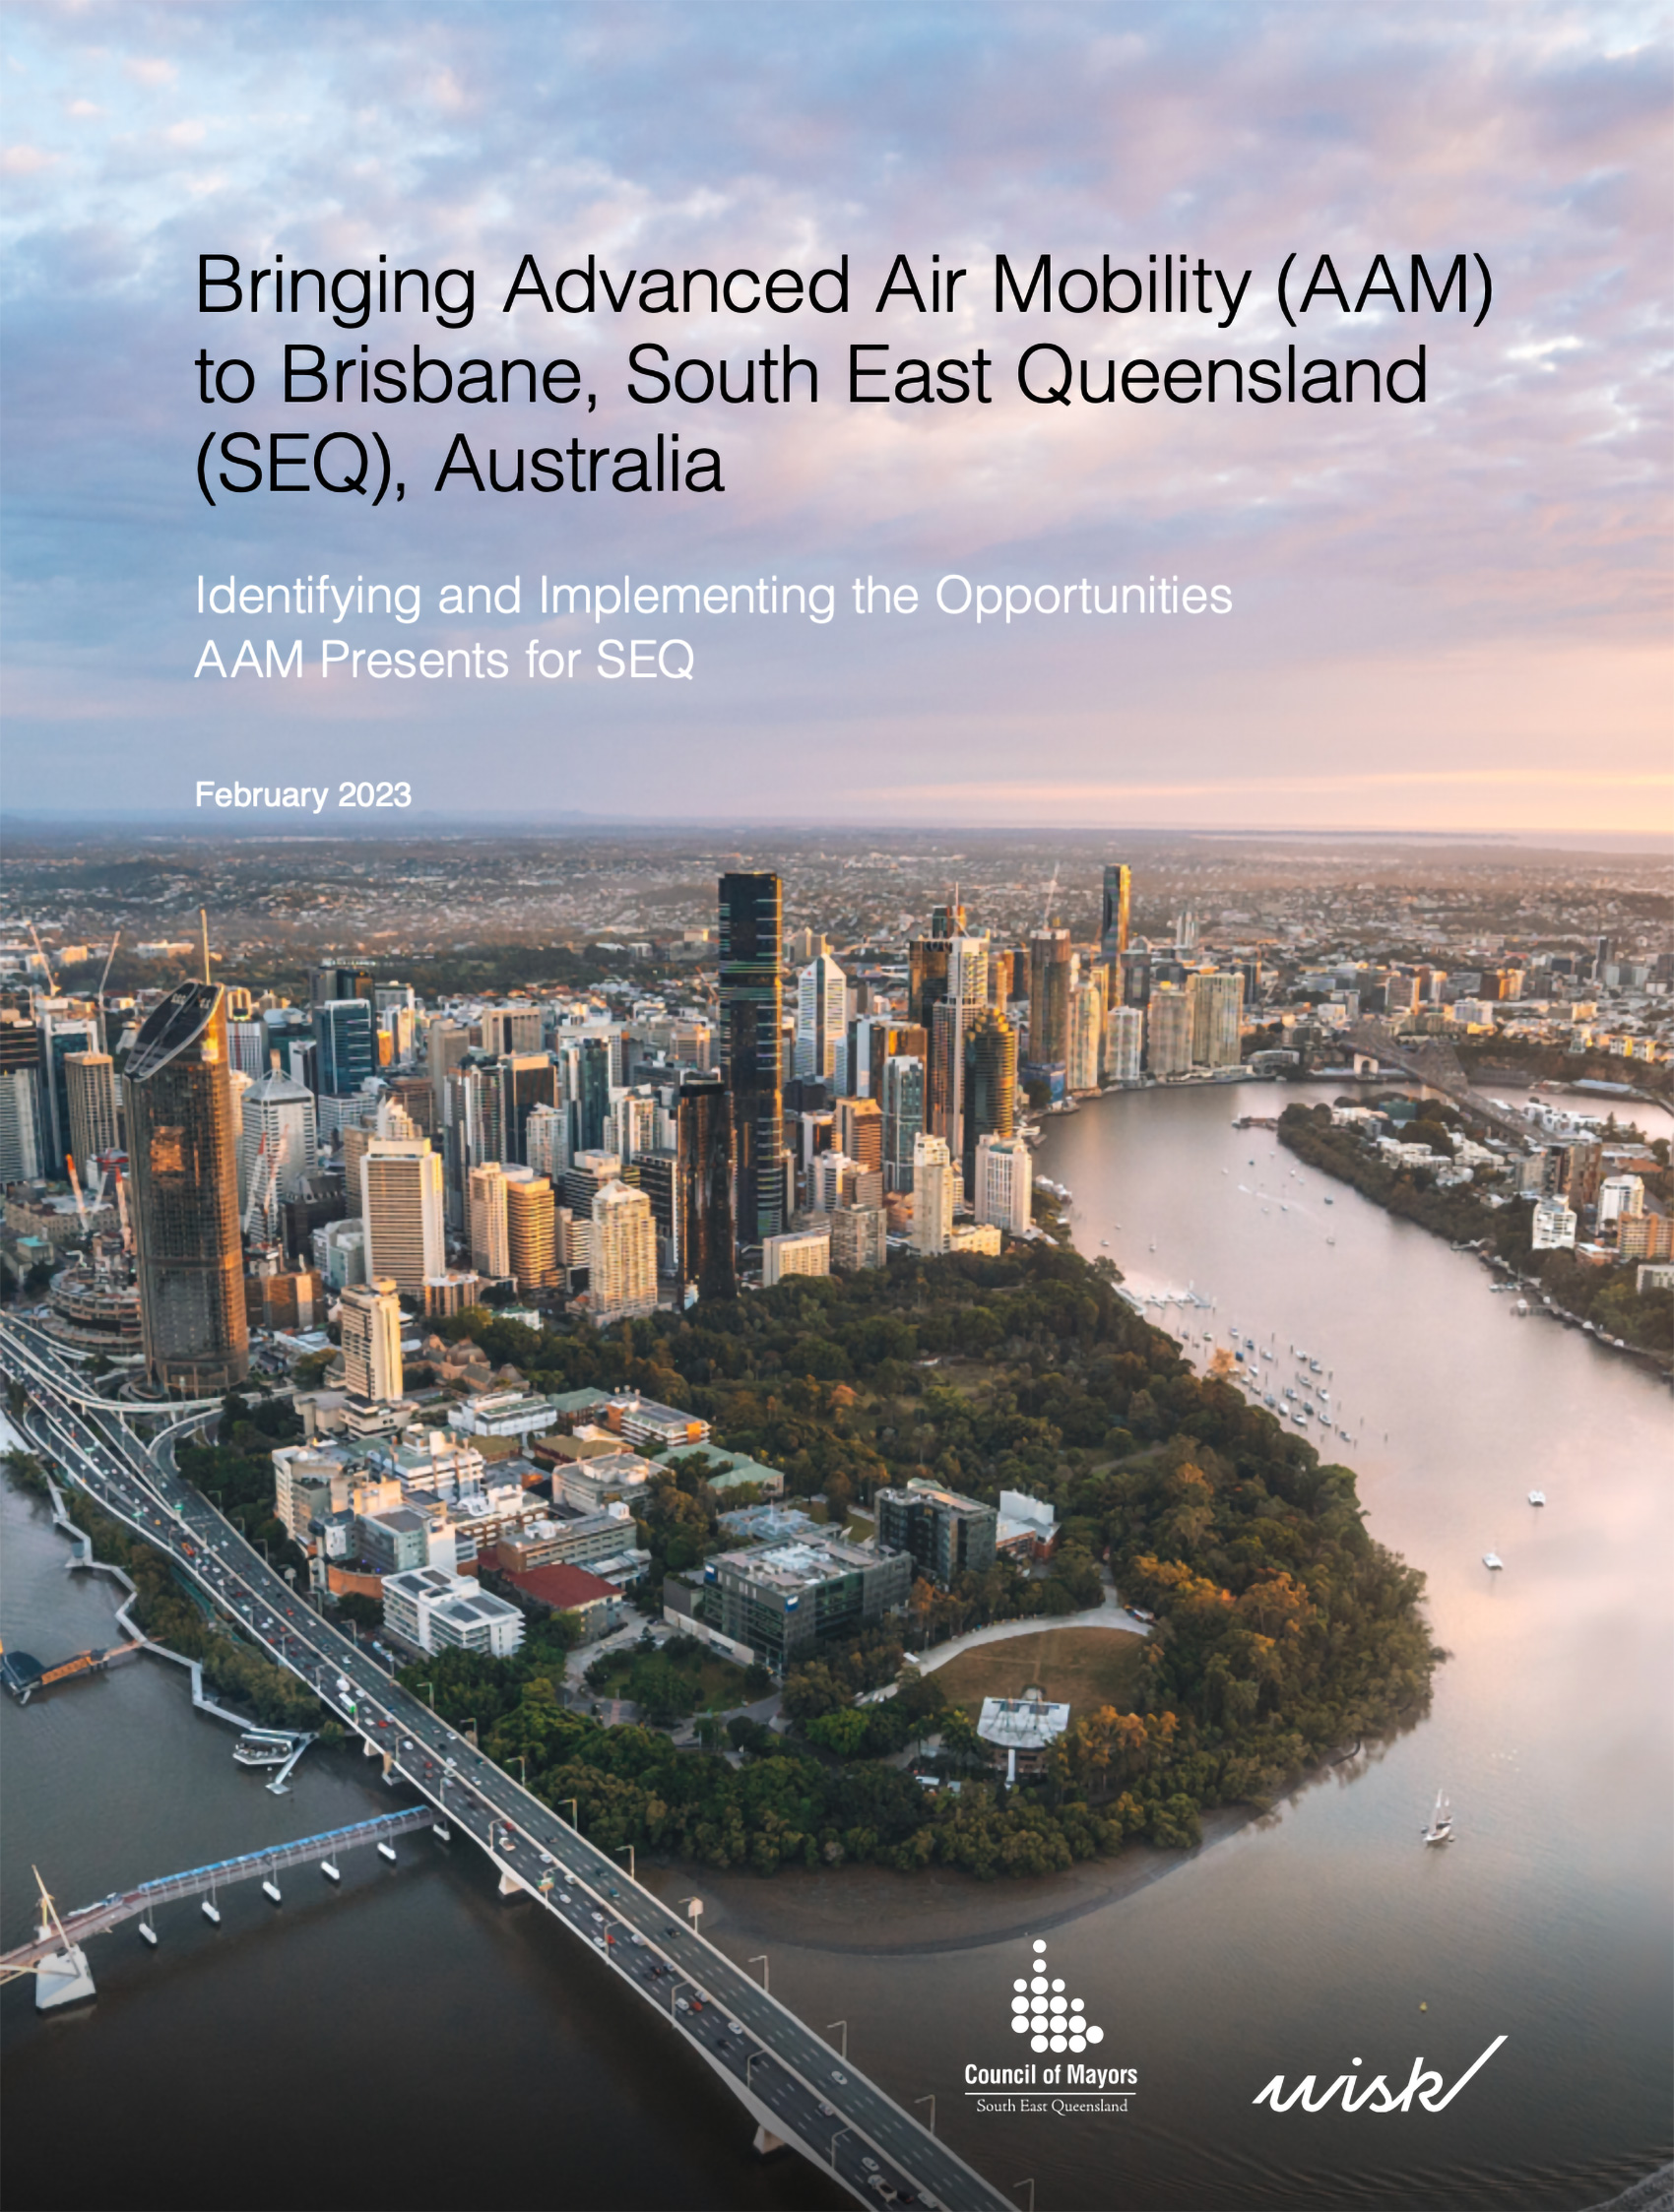 Cover image of the Wisk and CoMSEQ paper on bringing AAM to South East Queensland